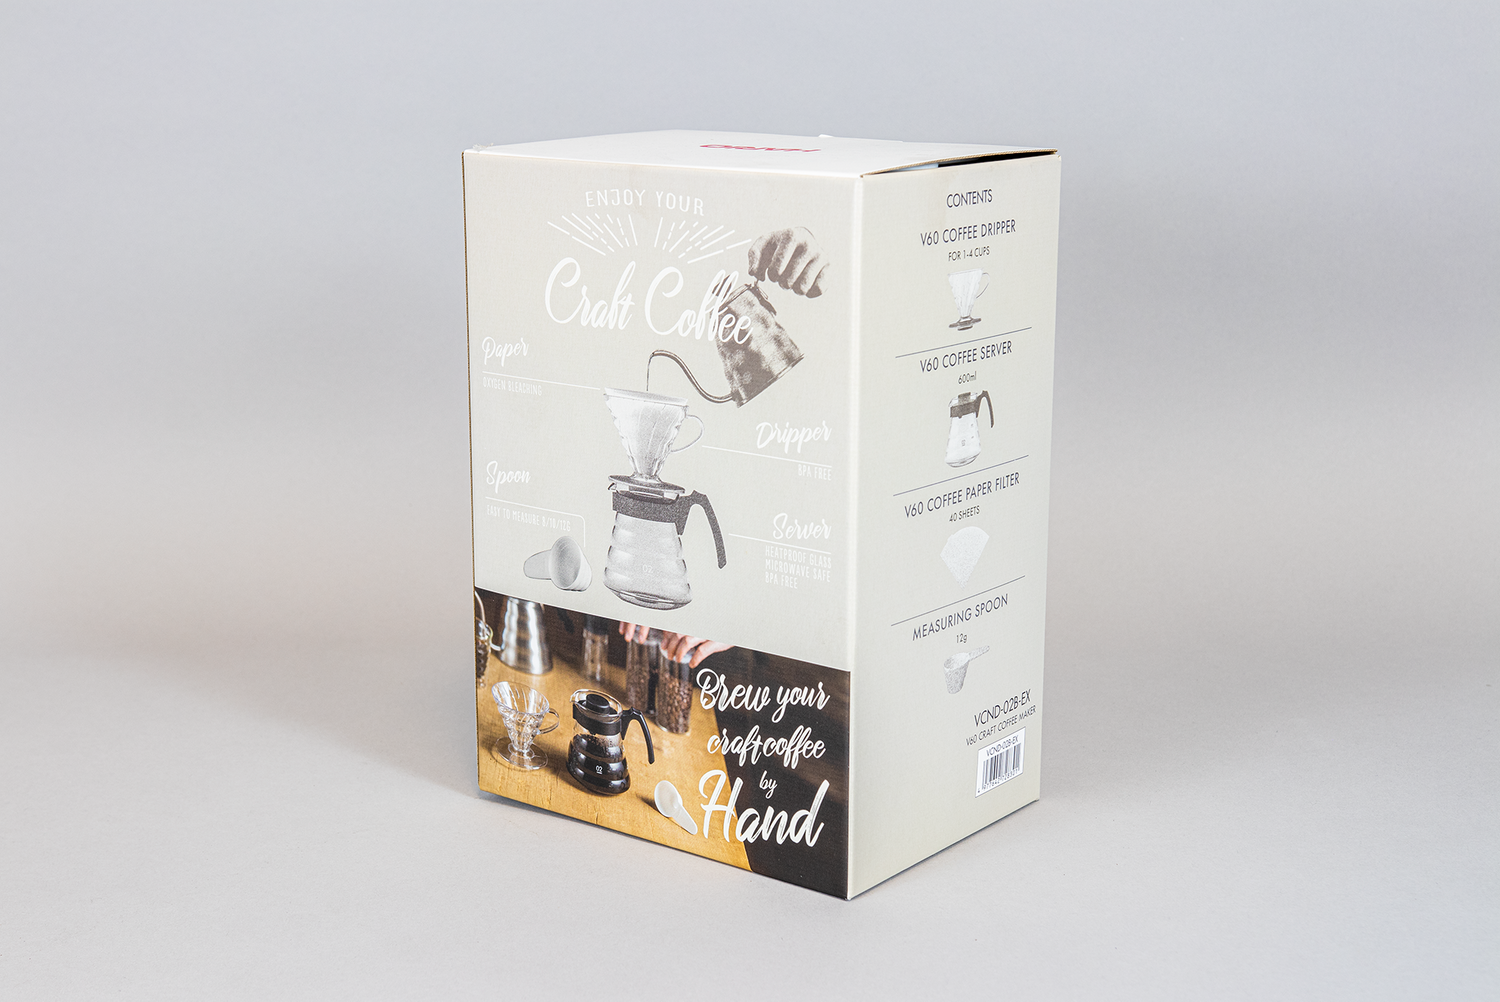 Medium cardboard box. Depicting a Coffee pour over kit and &quot;craft coffee&quot; branding.